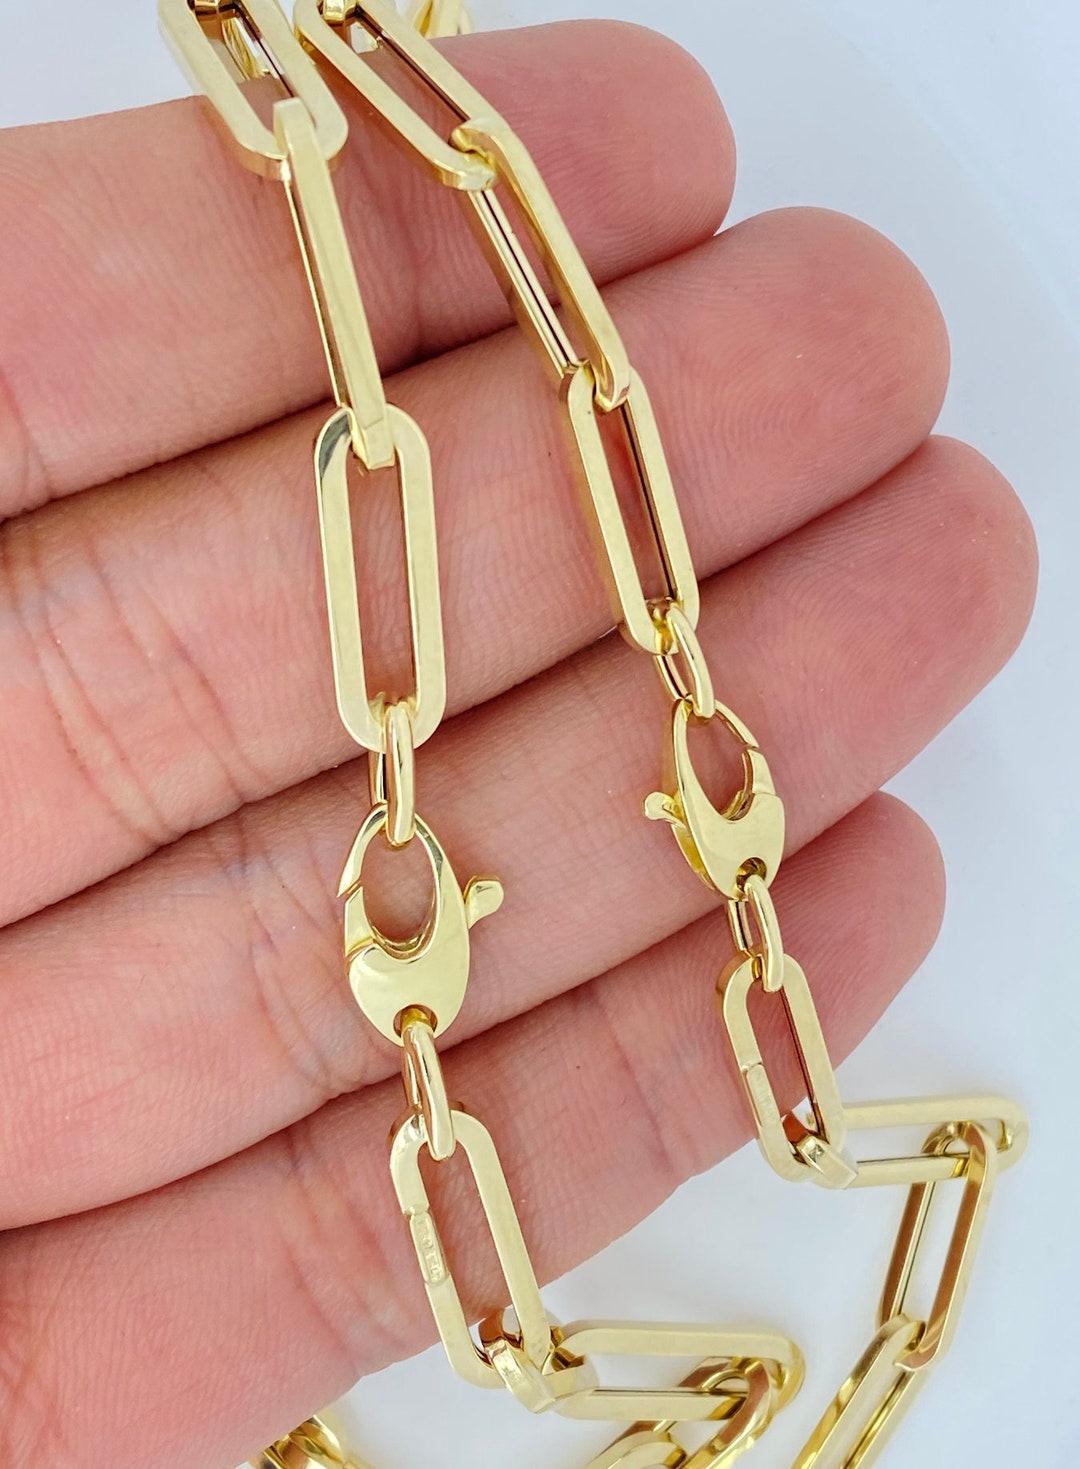 Genuine 14K Italian Yellow Gold Chunky Paperclip Necklace and Bracelet.  Elongated Link Necklace, Trending Gold Necklace 